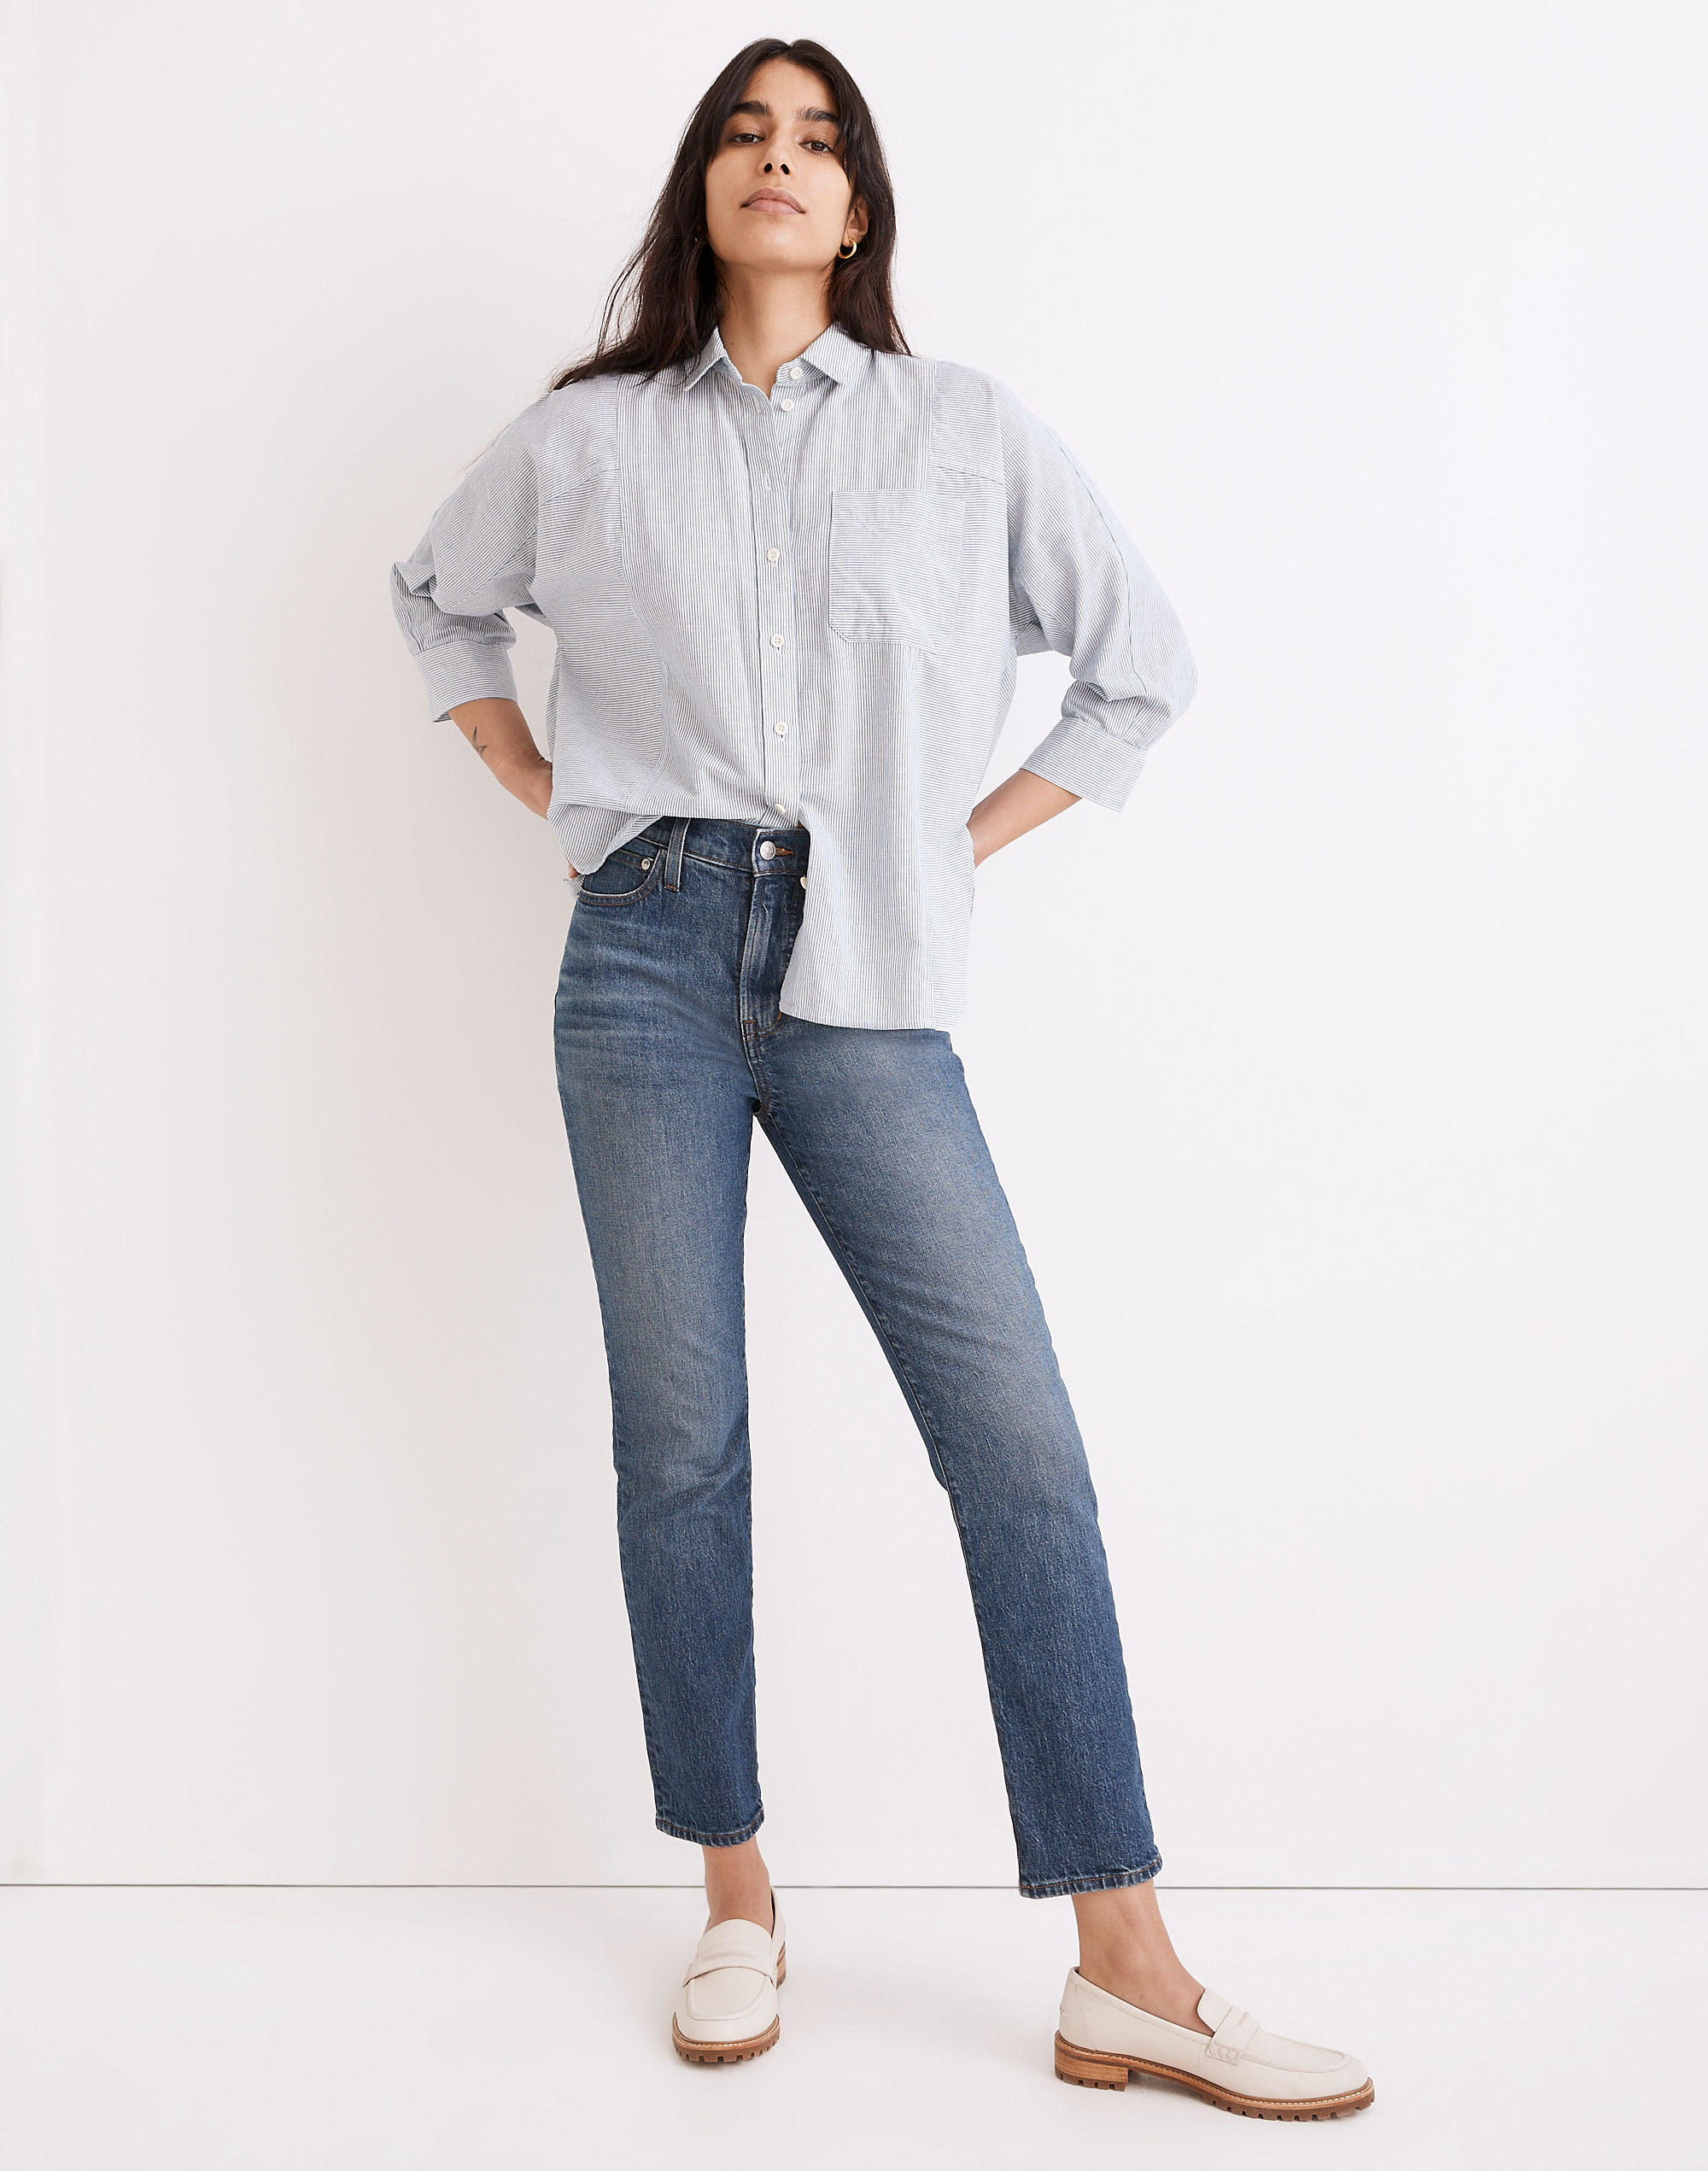 The Petite Perfect Vintage Jean in Drayton Wash